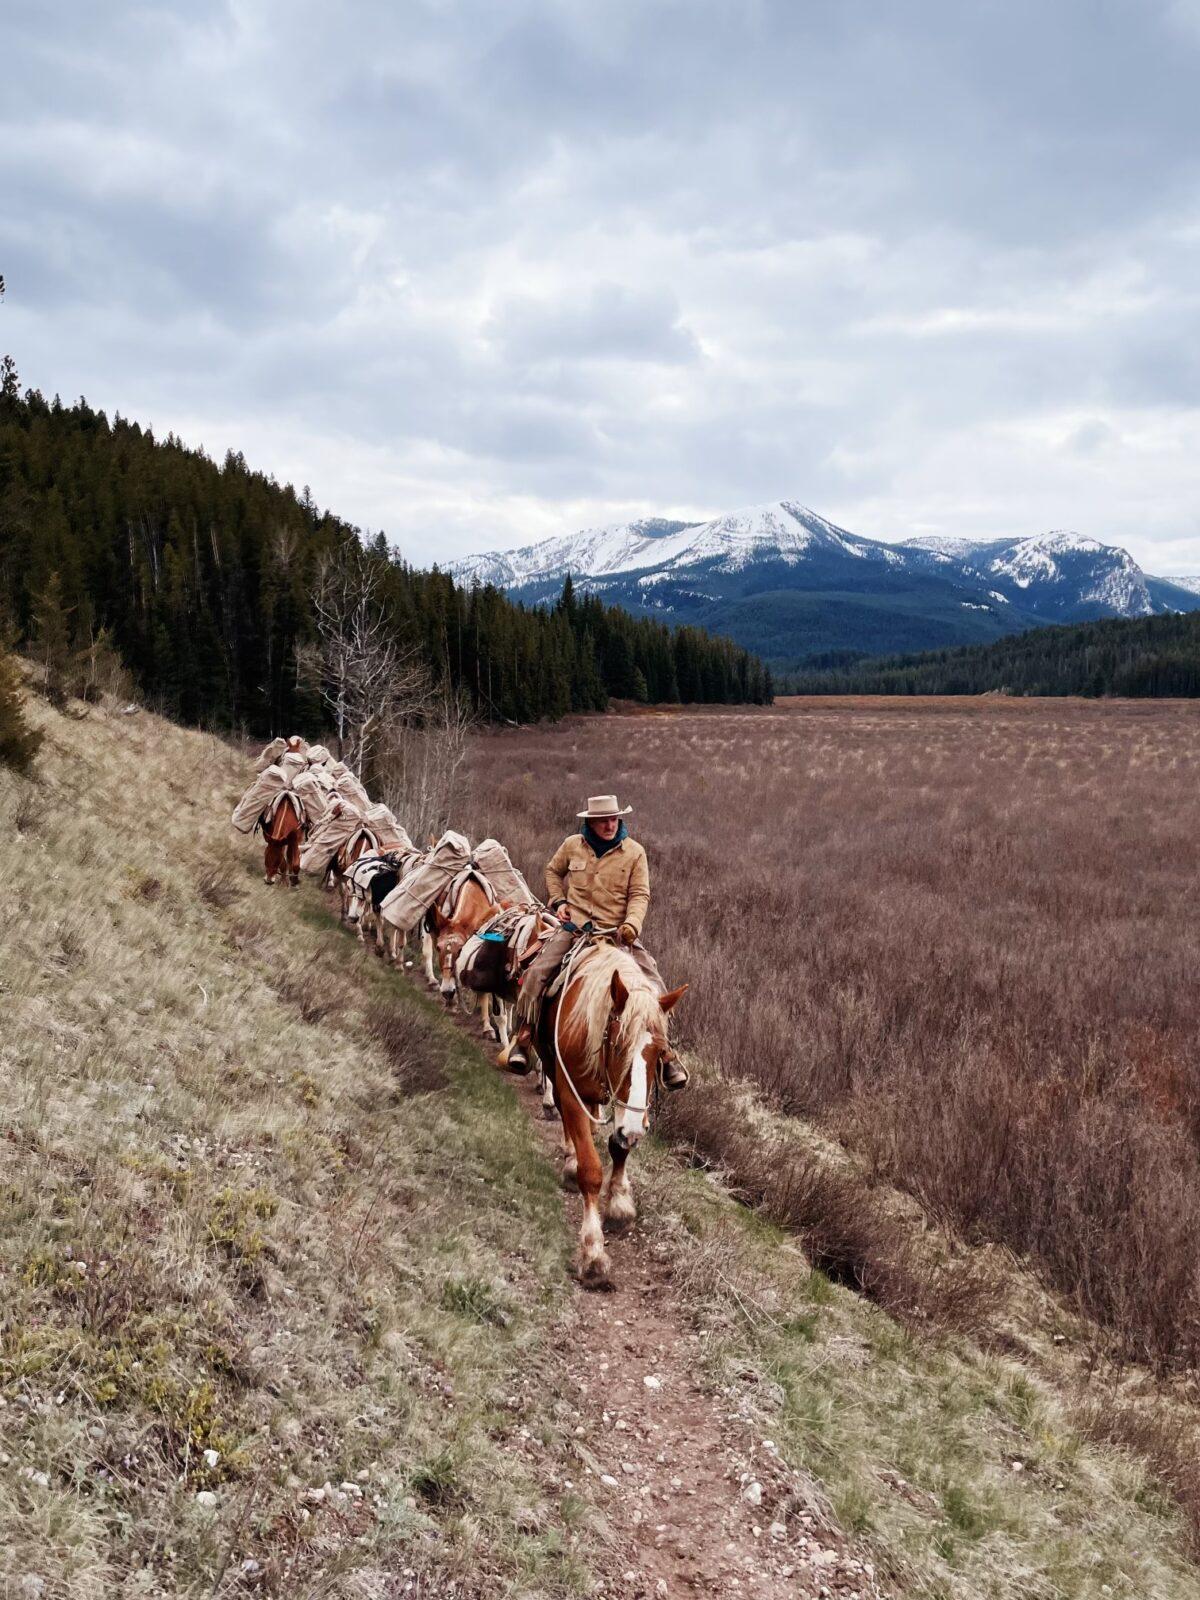 Chris Eyer and his pack of mules travel through the Danaher Meadows in the Bob Marshall Wilderness region. (Lindsey Mulcare)